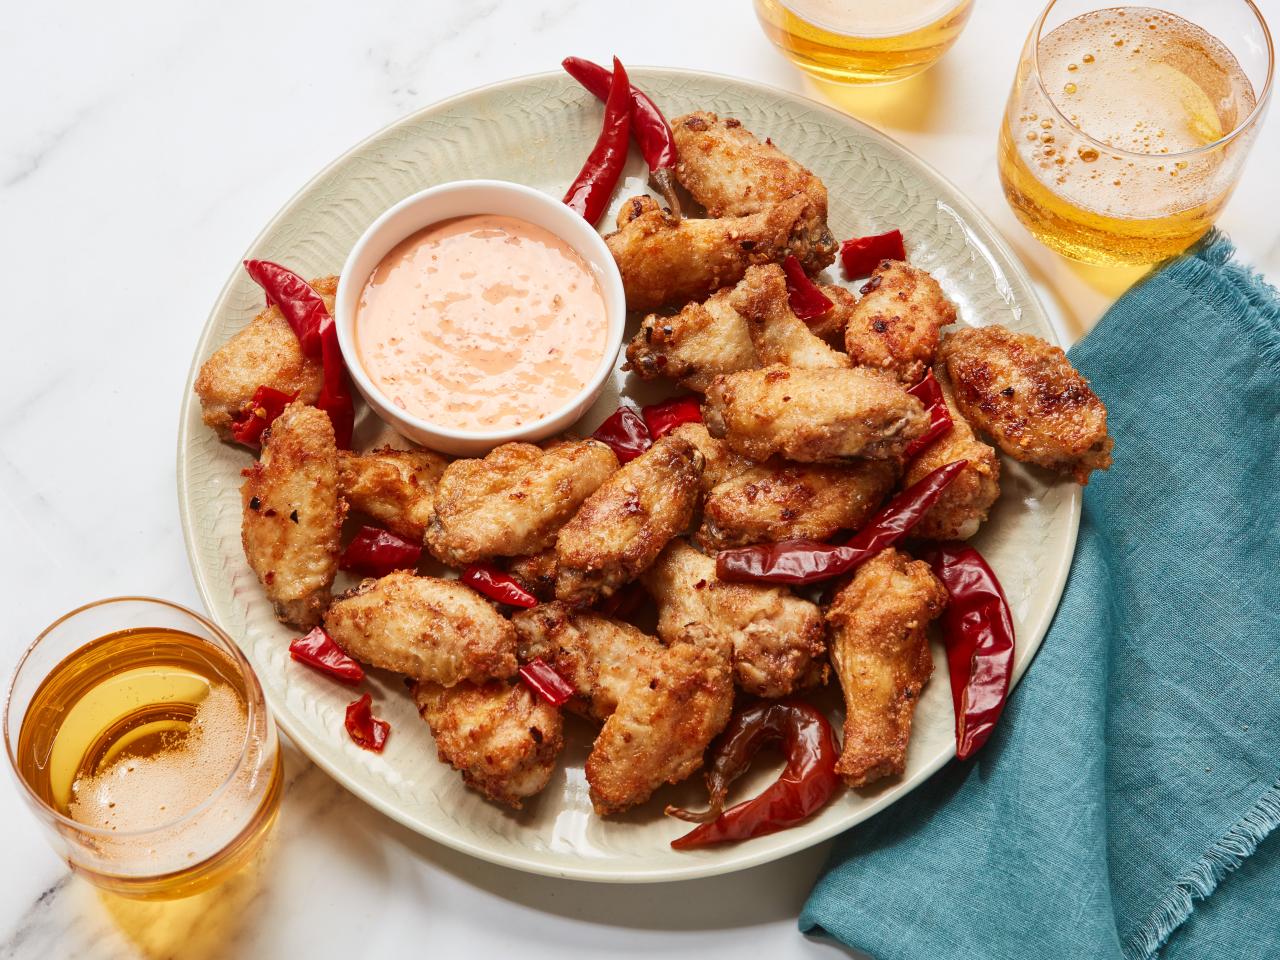 Crispy Baked Chicken Wings Recipe | Epicurious